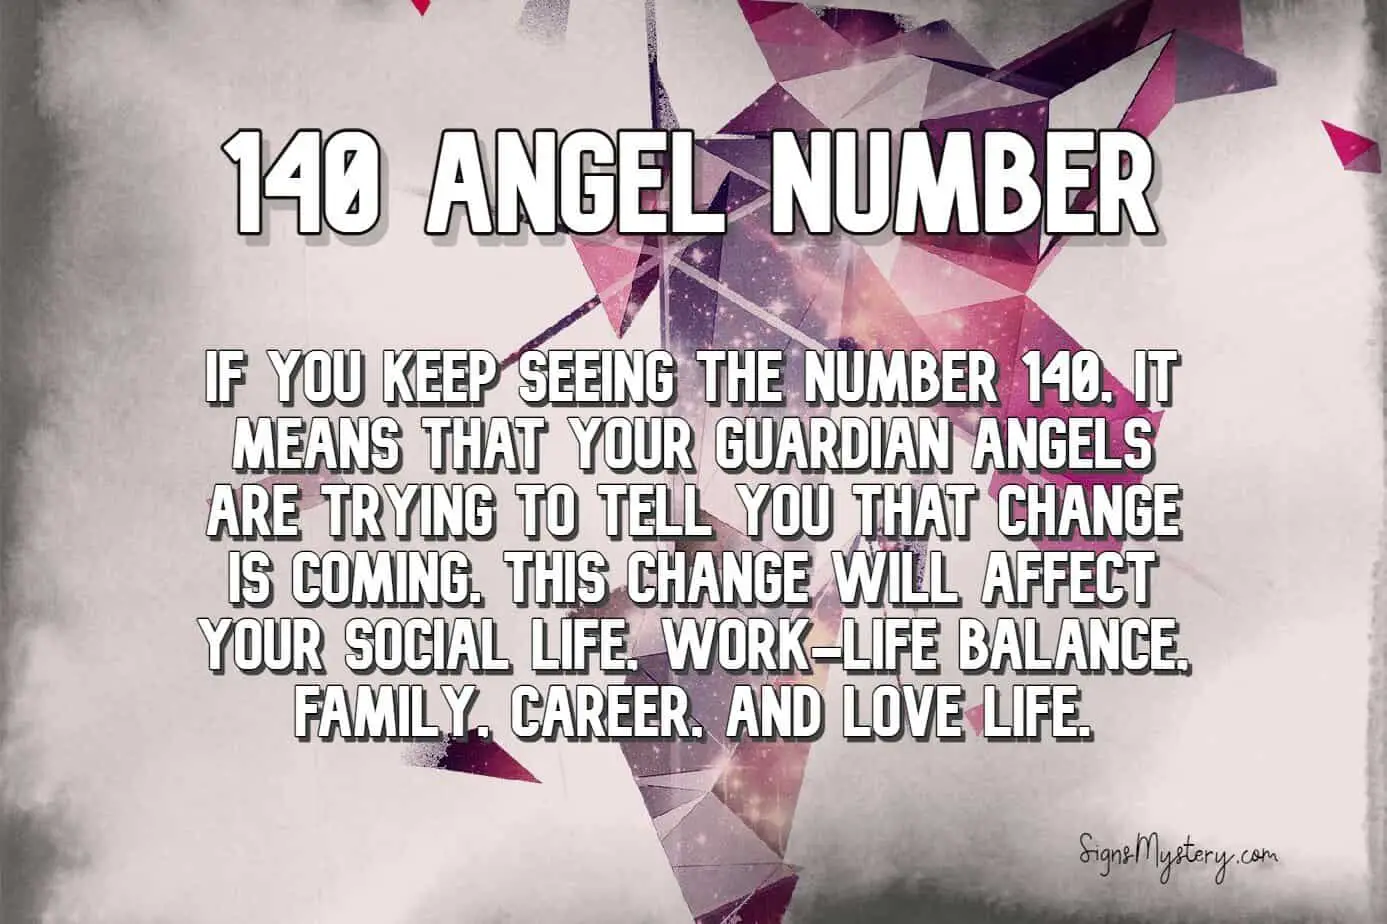 140 angel number meaning